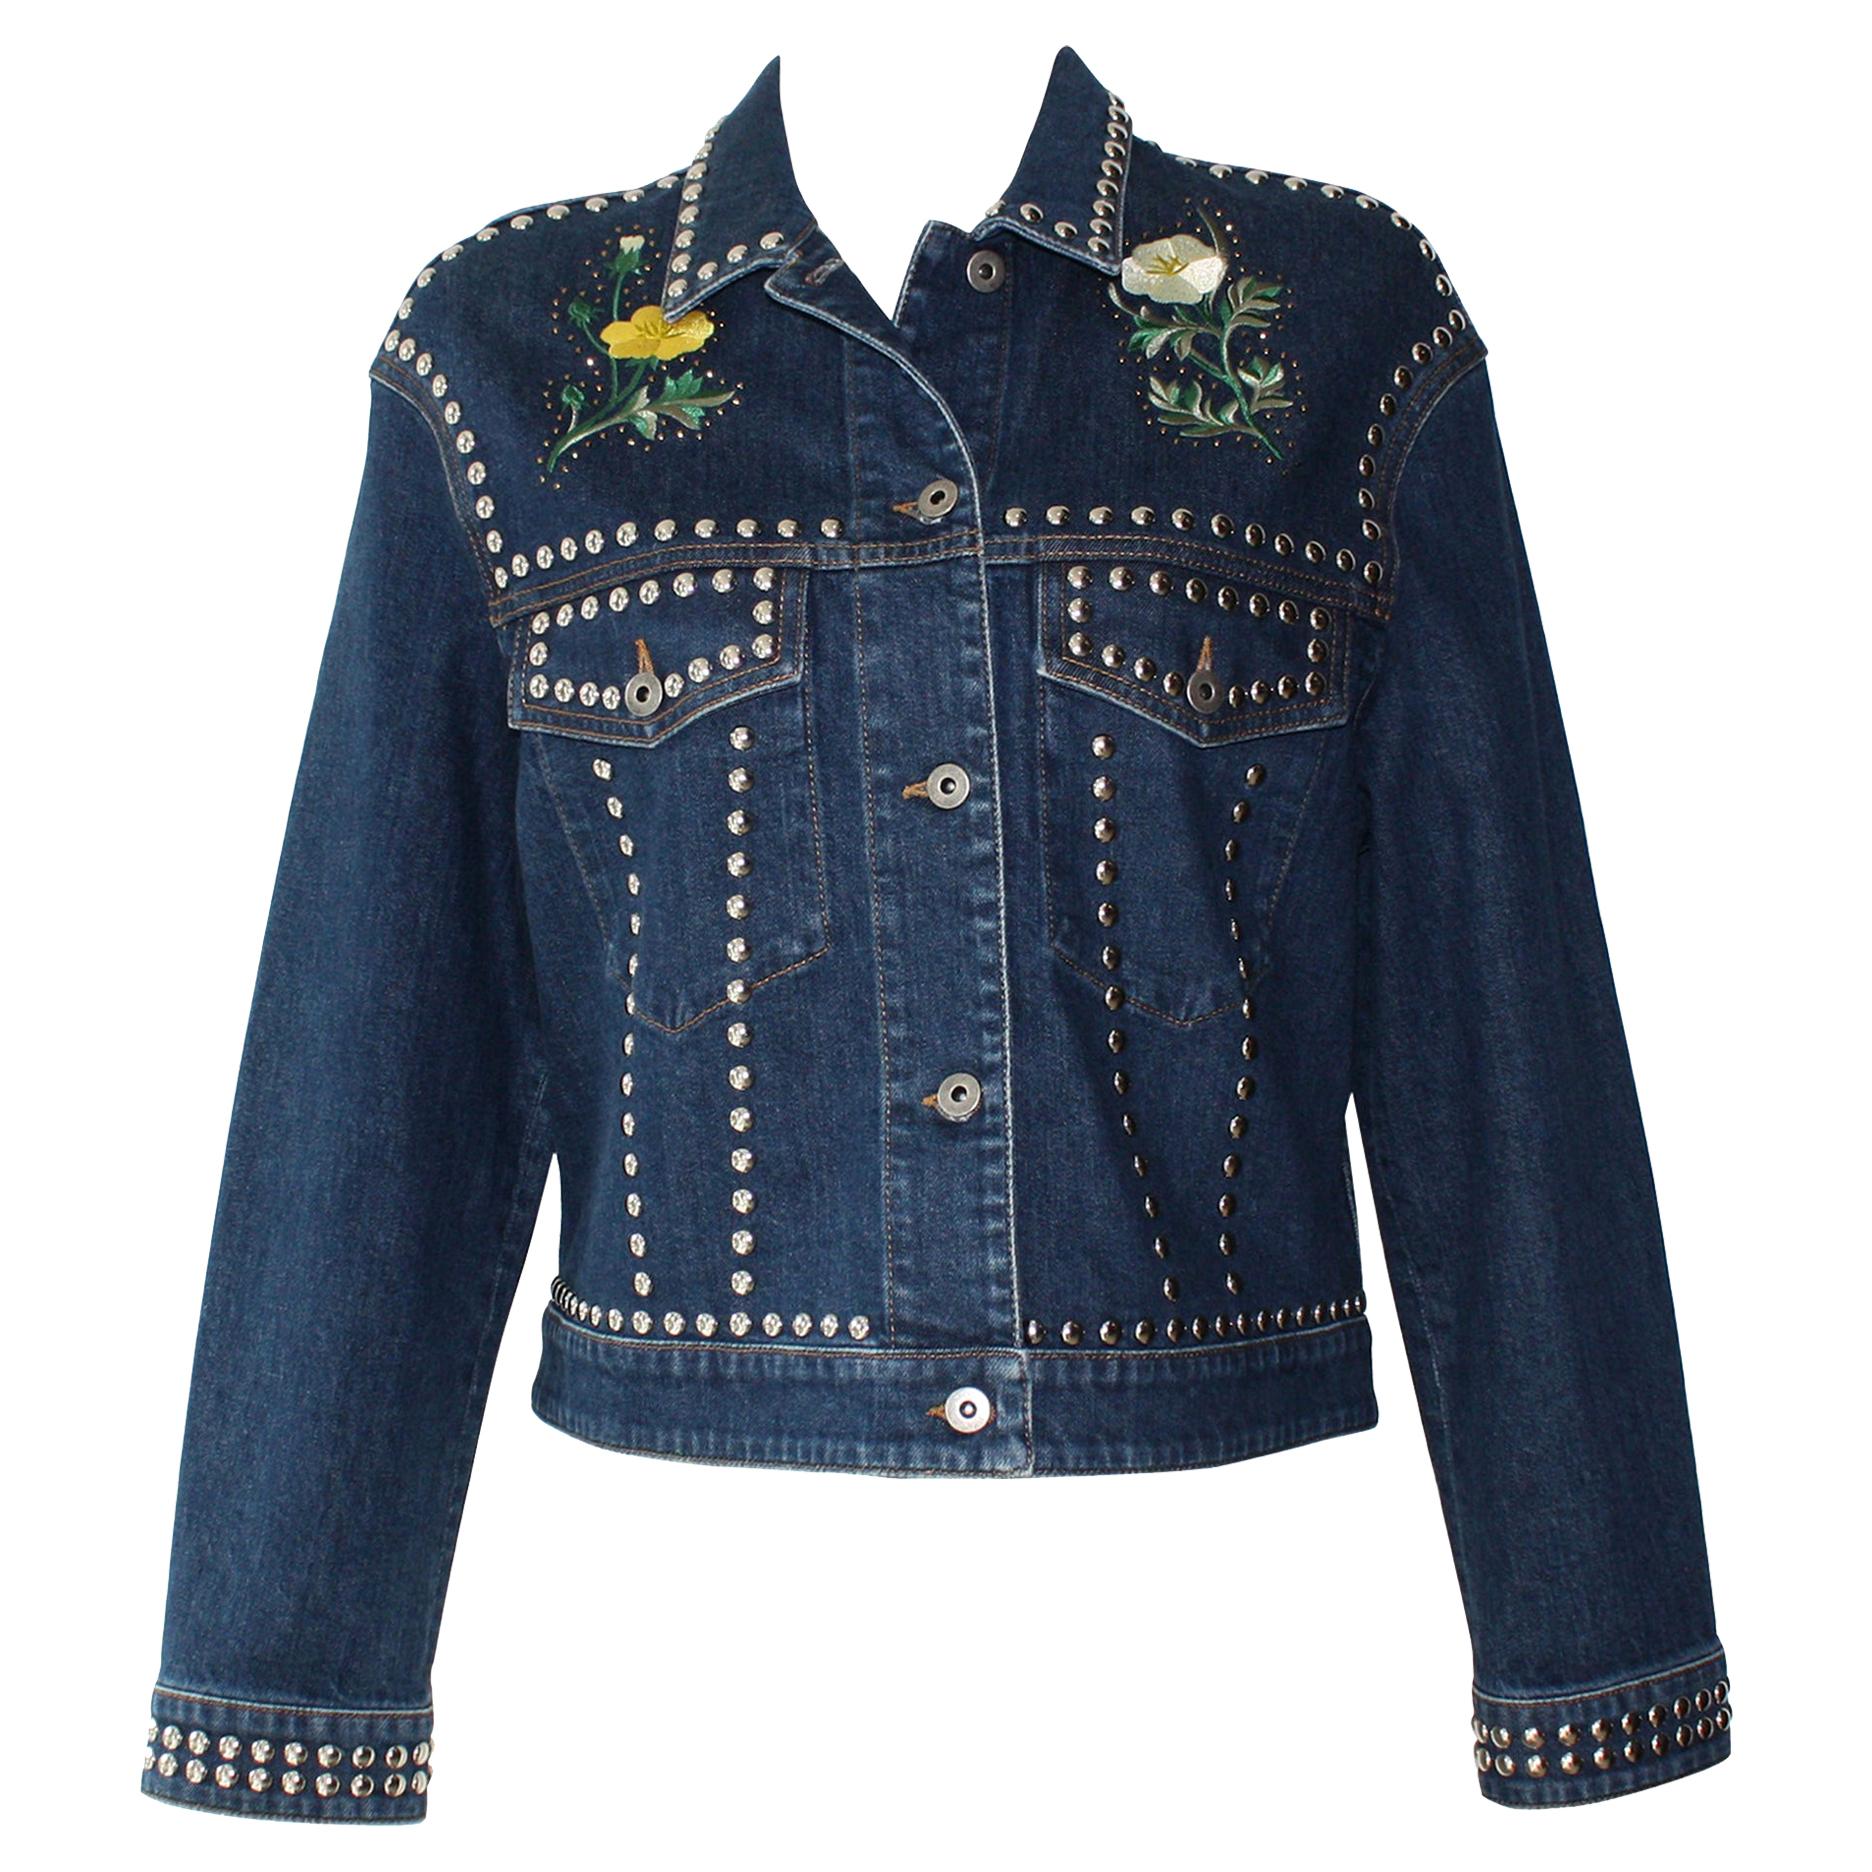 Stella McCartney Denim Multi-Colored and Floral Embroidered Jacket 